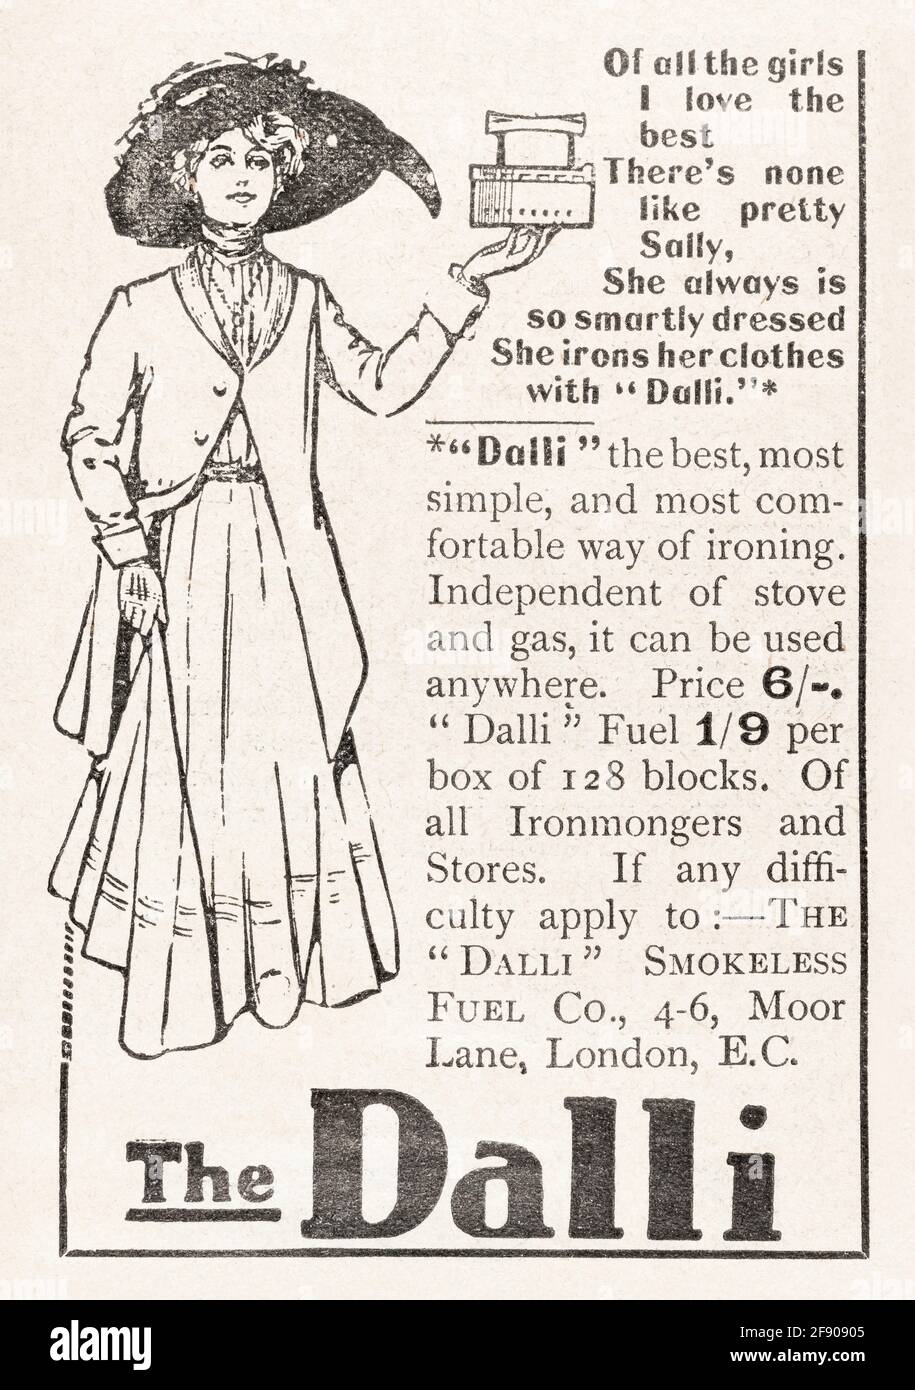 Old vintage Edwardian magazine advert for Dalli clothes iron from 1911. For old laundry equipment, Victorian domestic household life. Stock Photo